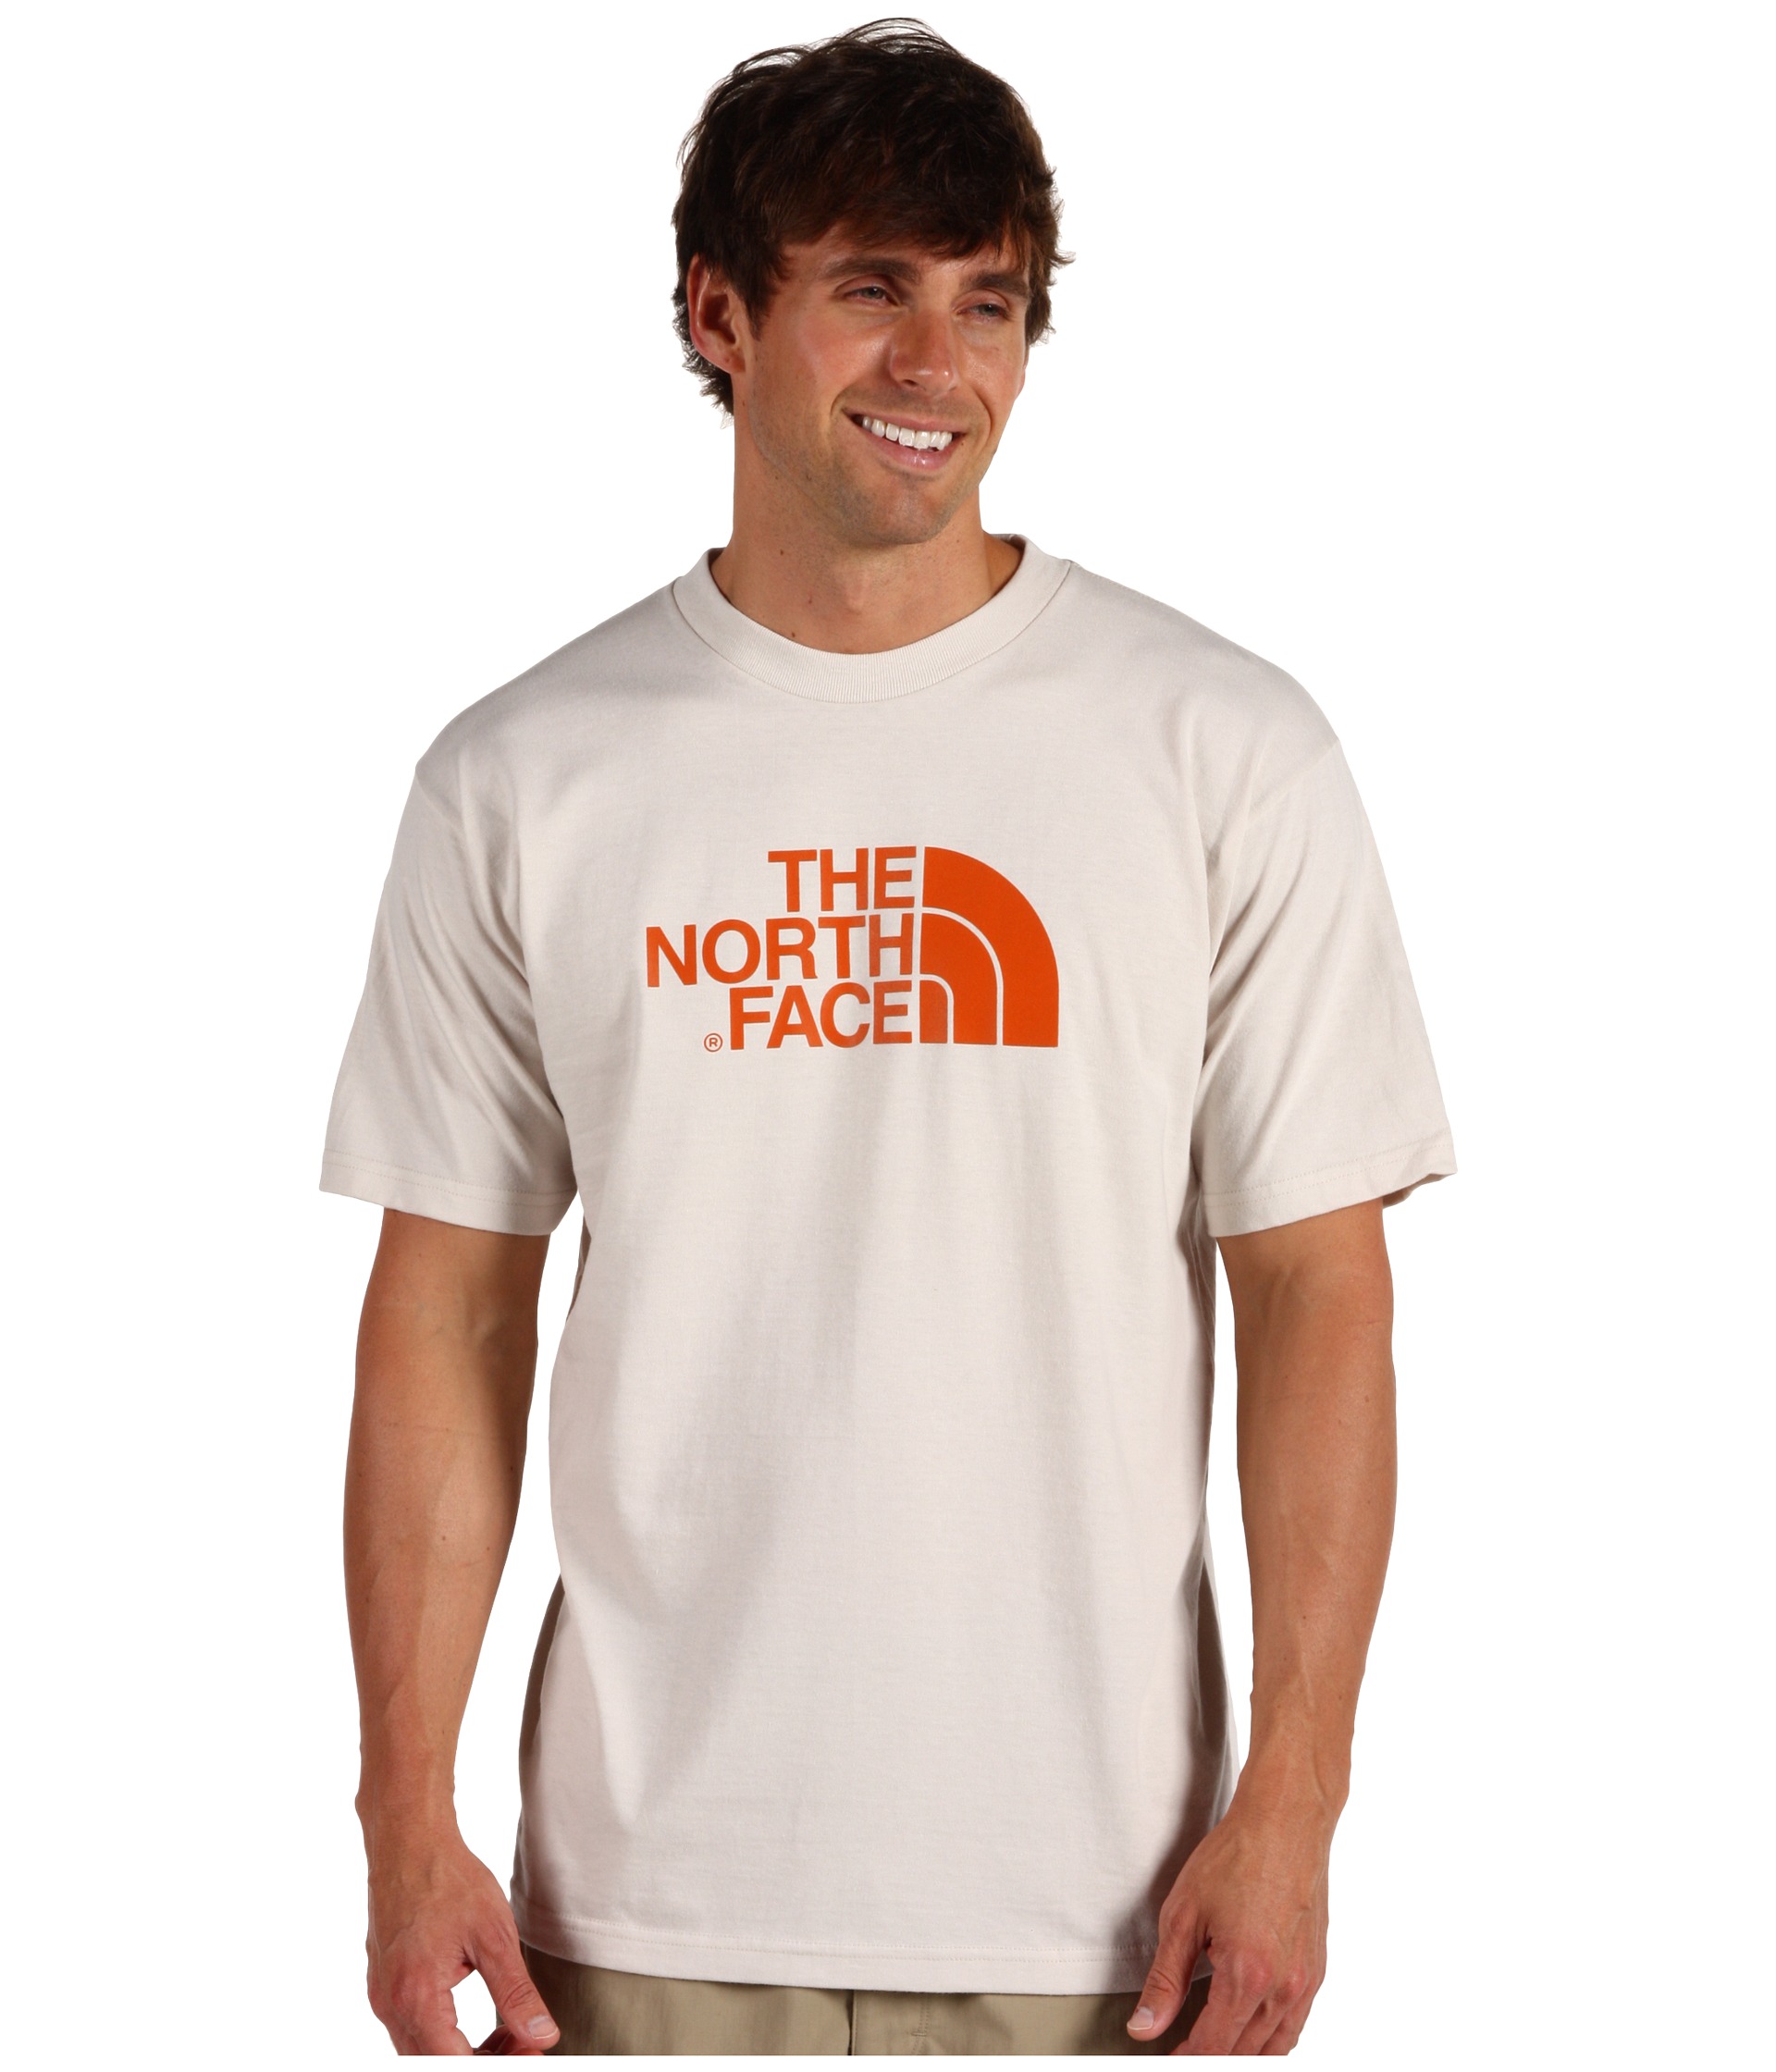 The North Face Mens S/S Half Dome Tee $22.99 ( 8% off MSRP $25.00)